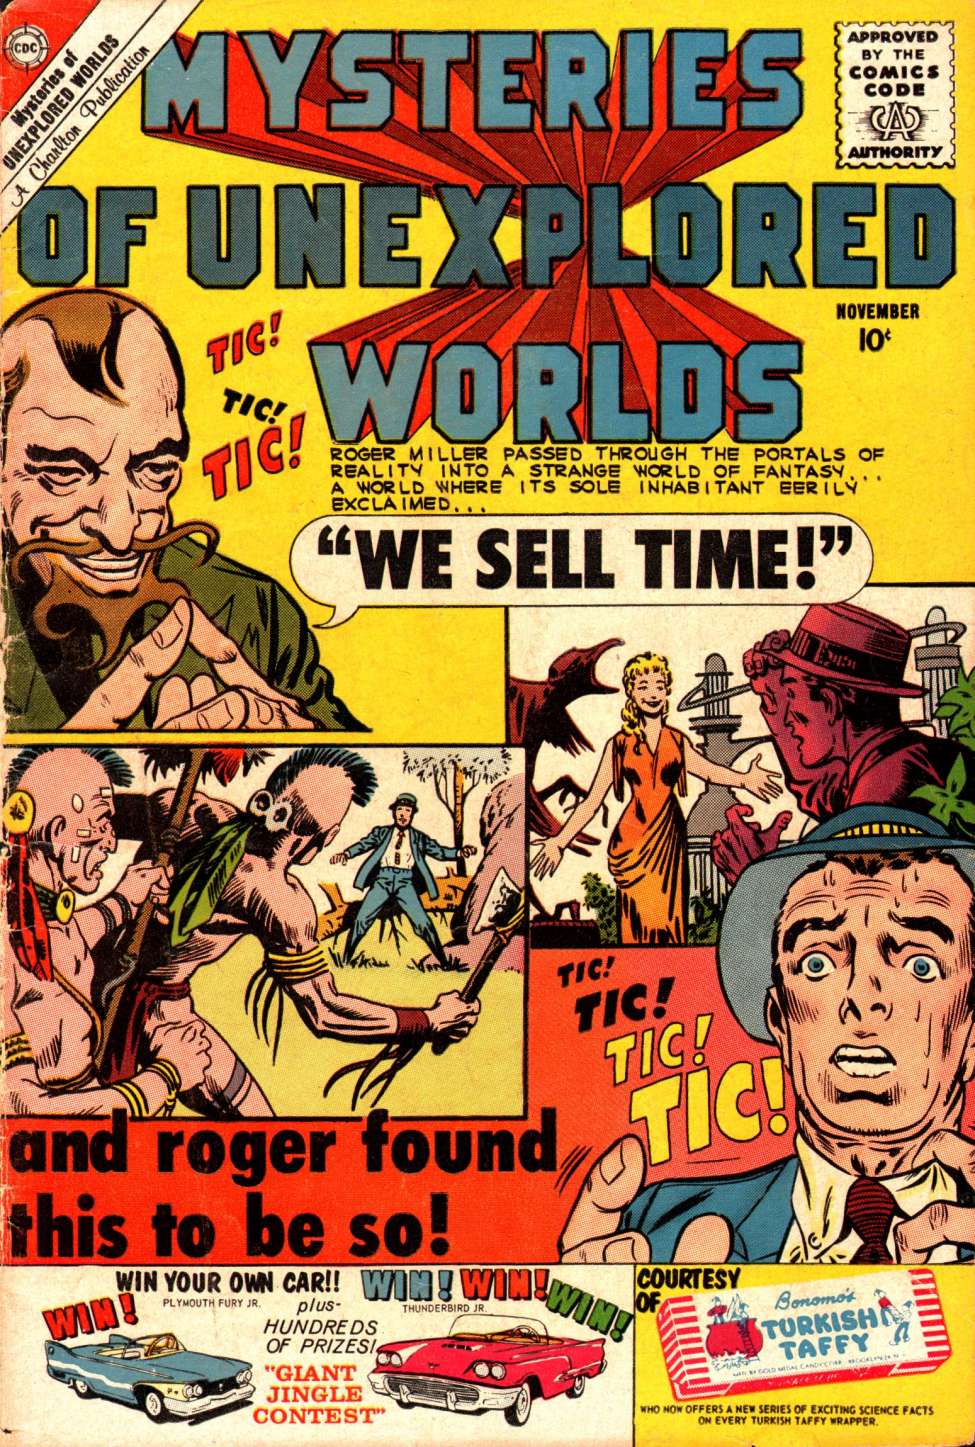 Comic Book Cover For Mysteries of Unexplored Worlds 21